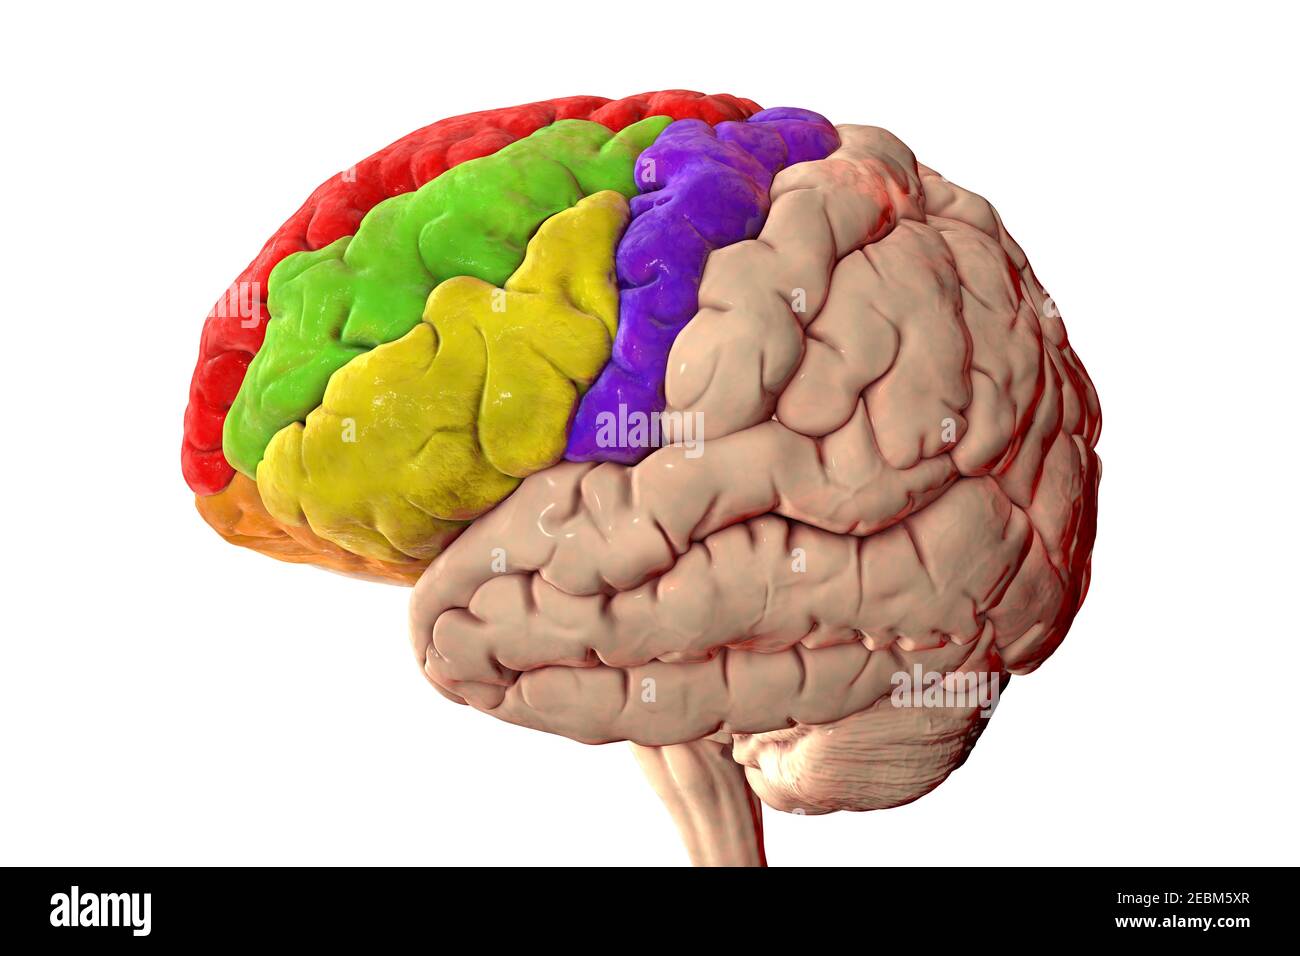 Human brain with highlighted frontal gyri, illustration Stock Photo